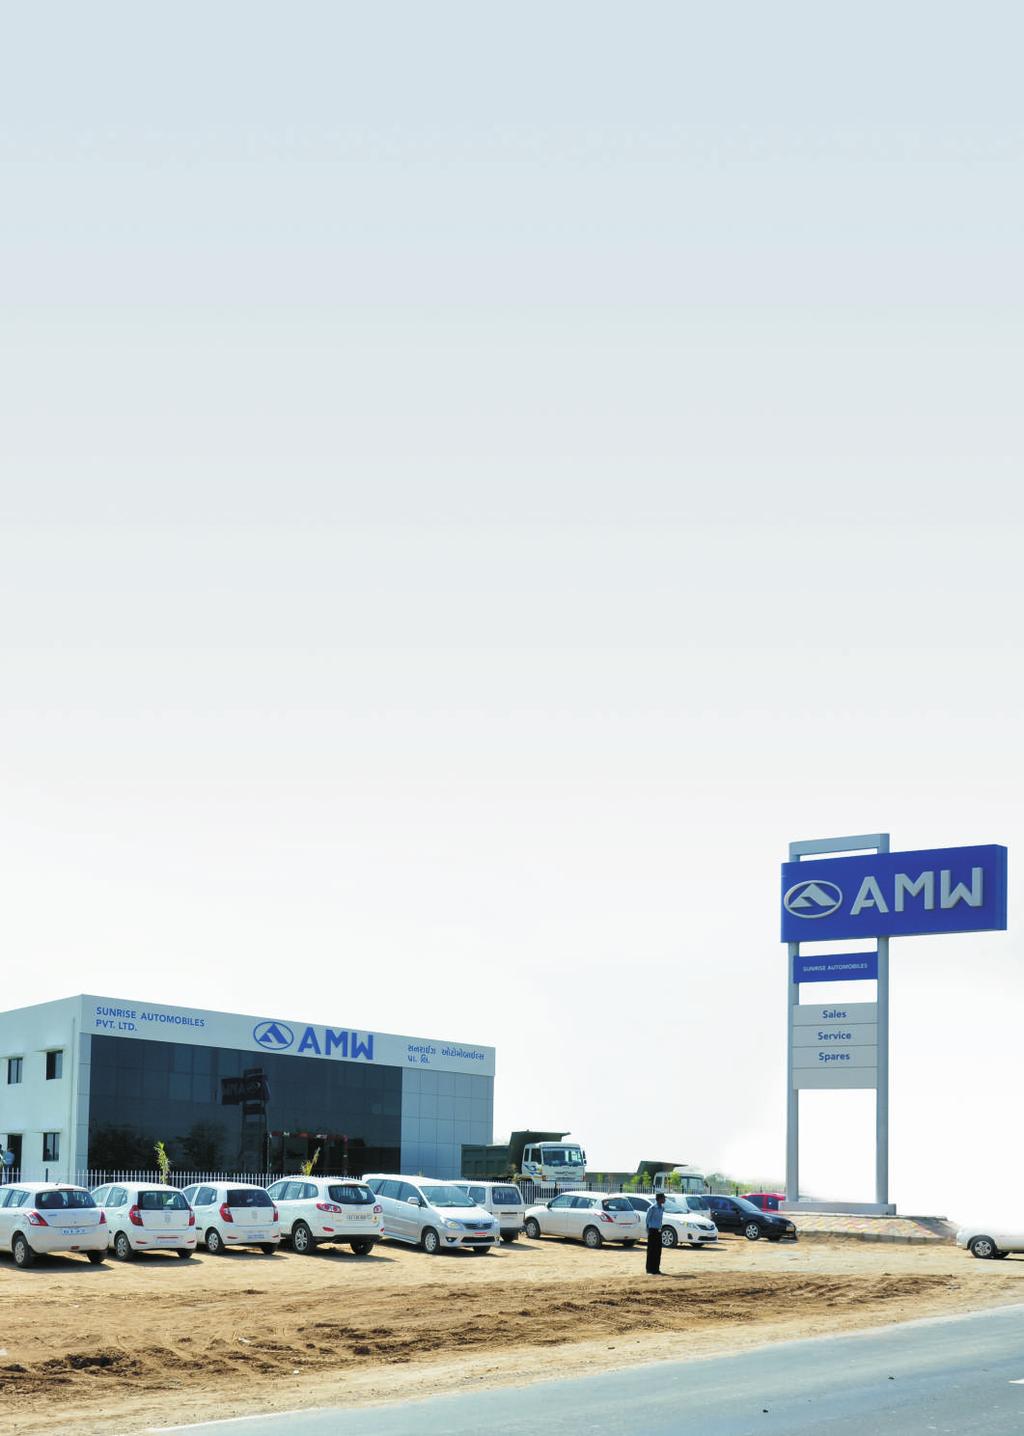 I N S I G H T AMW CONTINUES EXPANSION OF ITS DEALER NETWORK Sunrise Automotive appointed Dealer at Mehsana, Gujarat Mehsana, April 23, 2013: